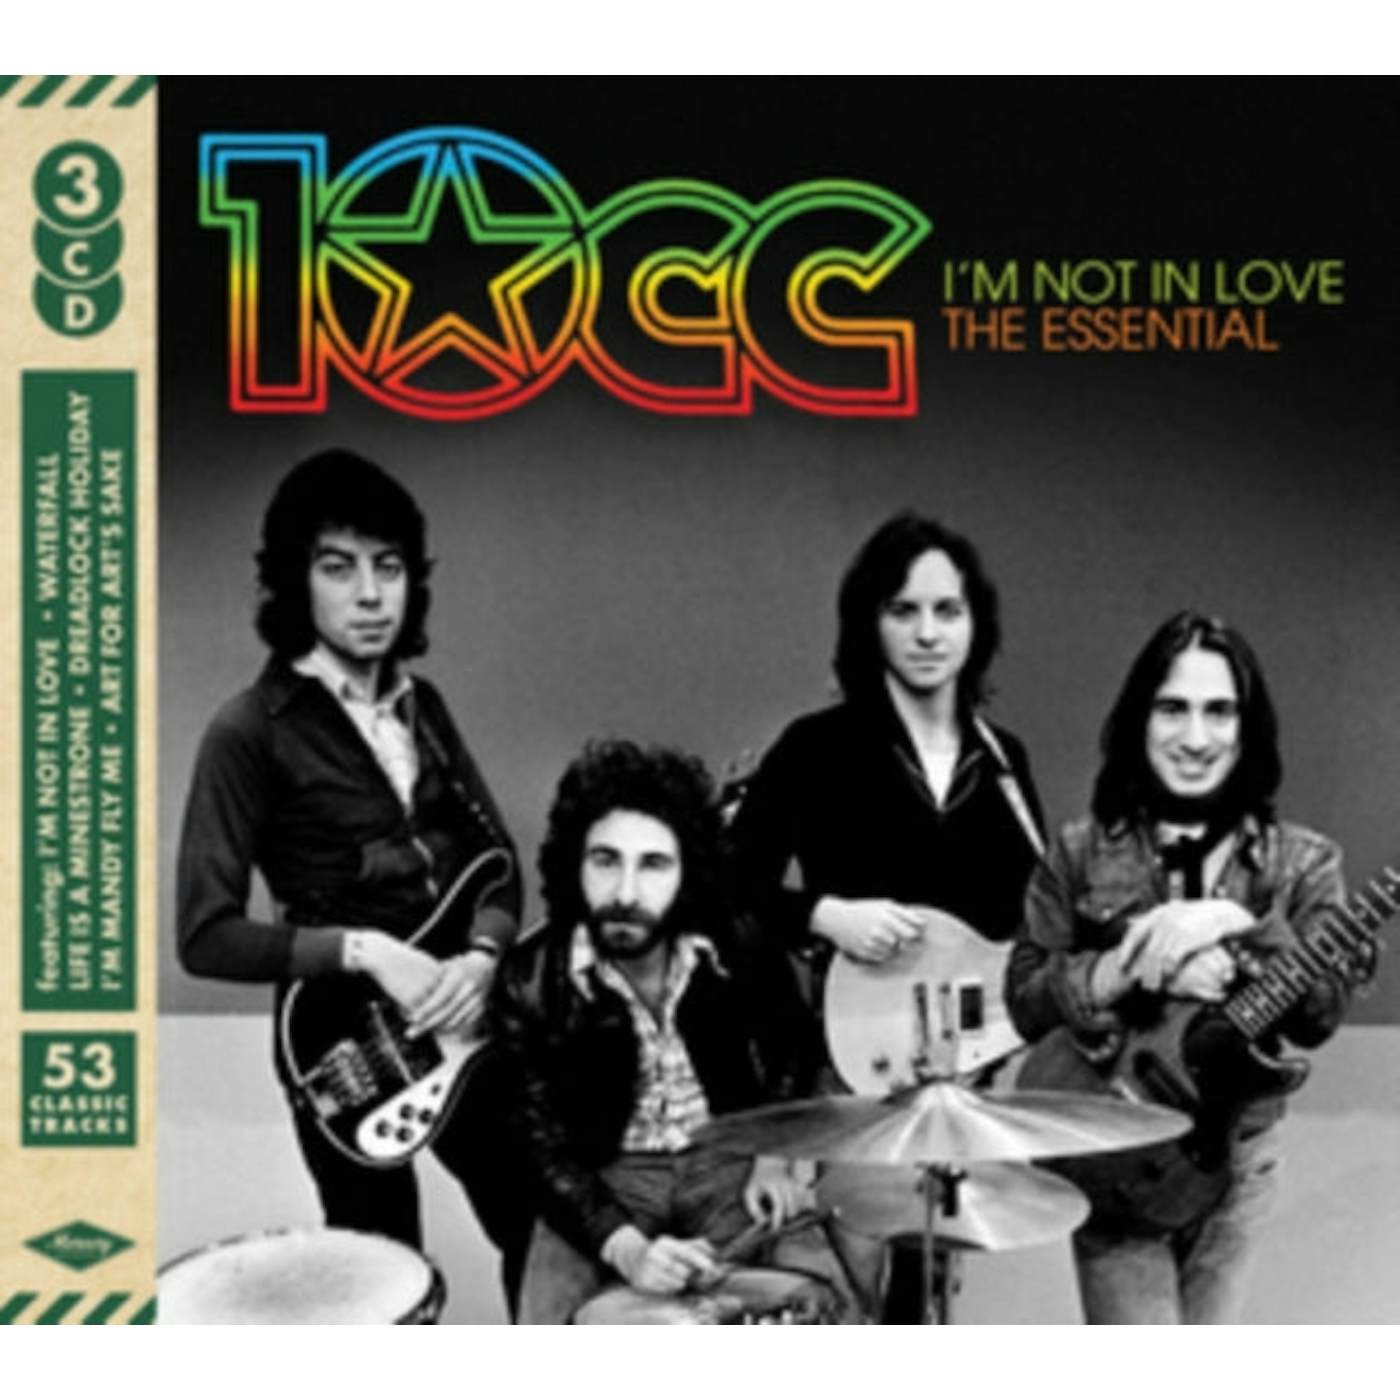 10cc CD - I'm Not In Love - The Essential